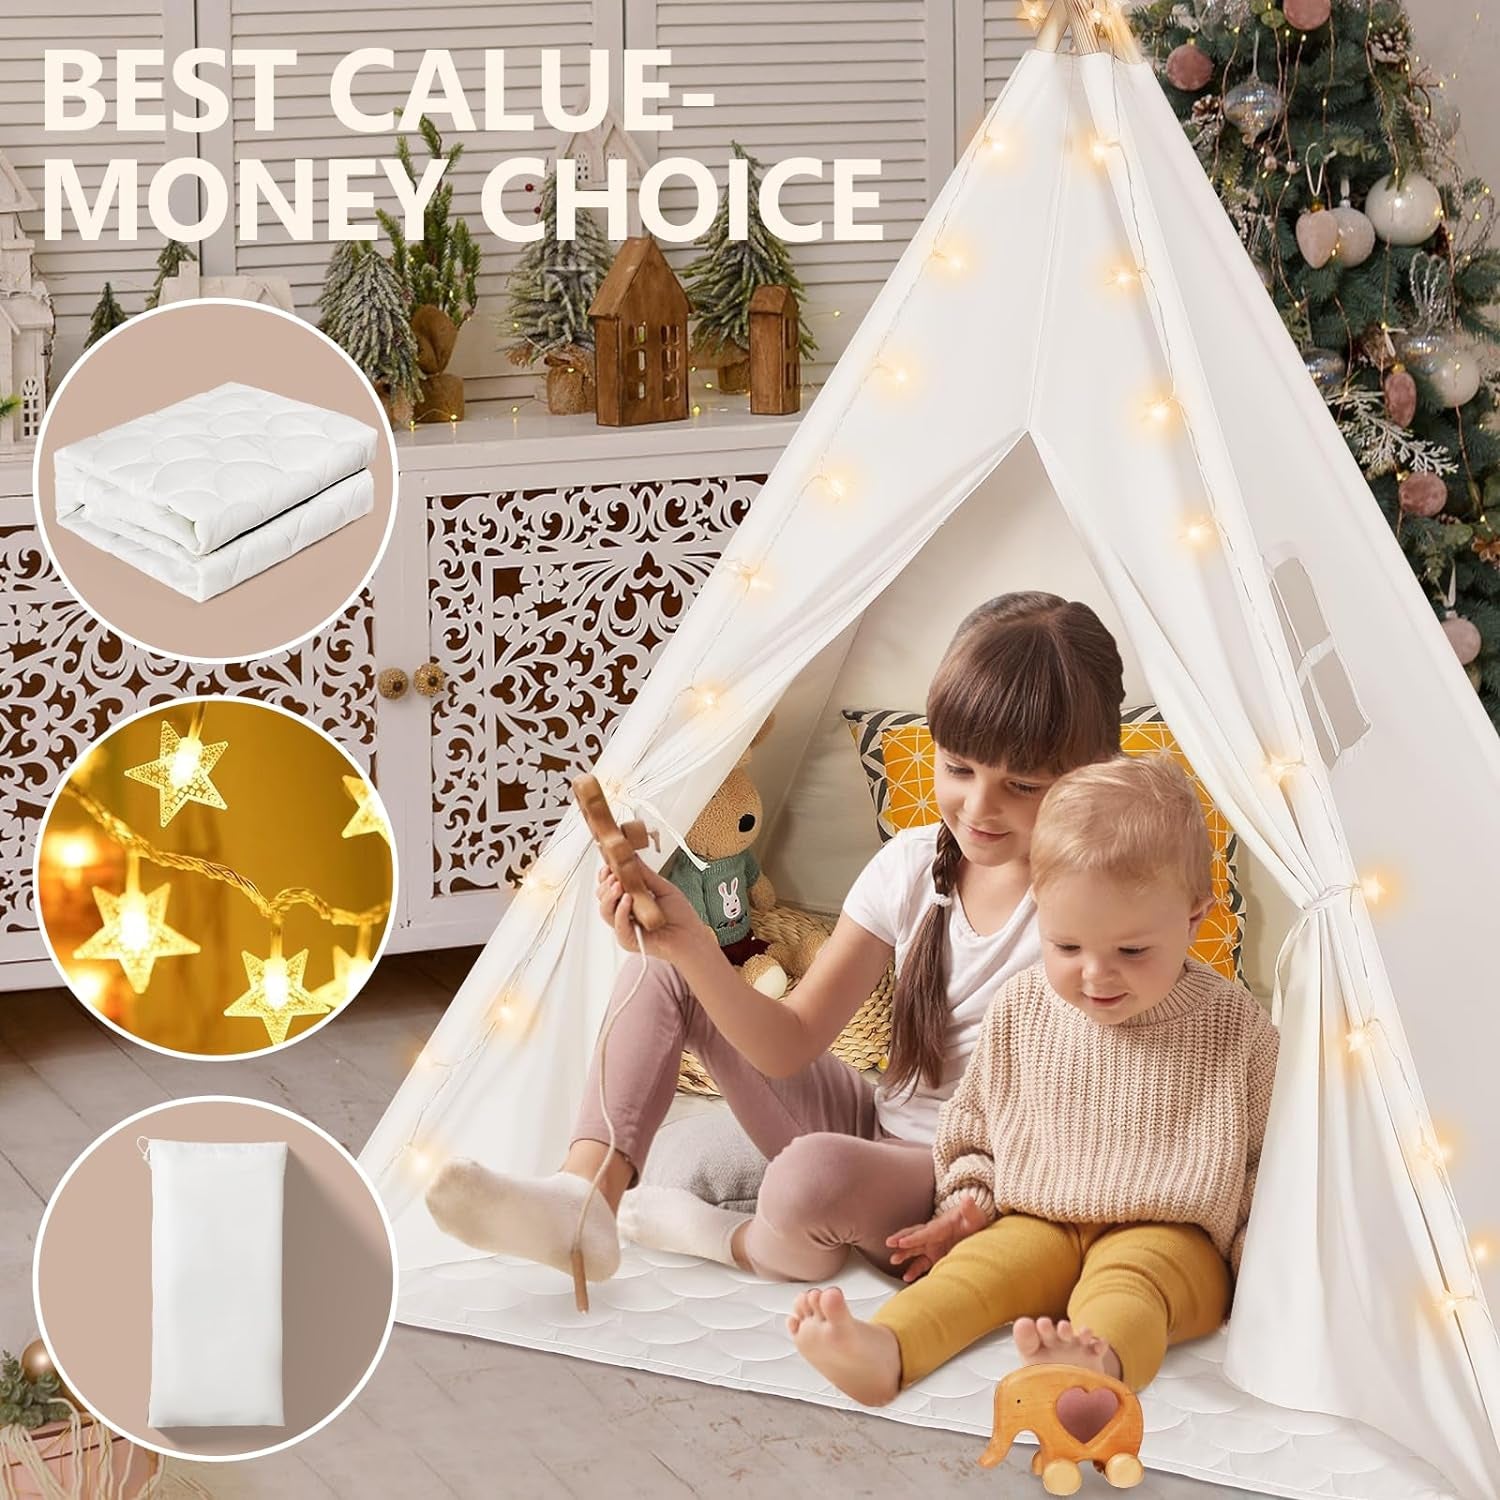 "Adventure Awaits: Deluxe Teepee Tent for Kids - Perfect for Indoor and Outdoor Playtime, Includes Carry Case - Ideal Gift for Boys and Girls (White Canvas Teepee Tent)"